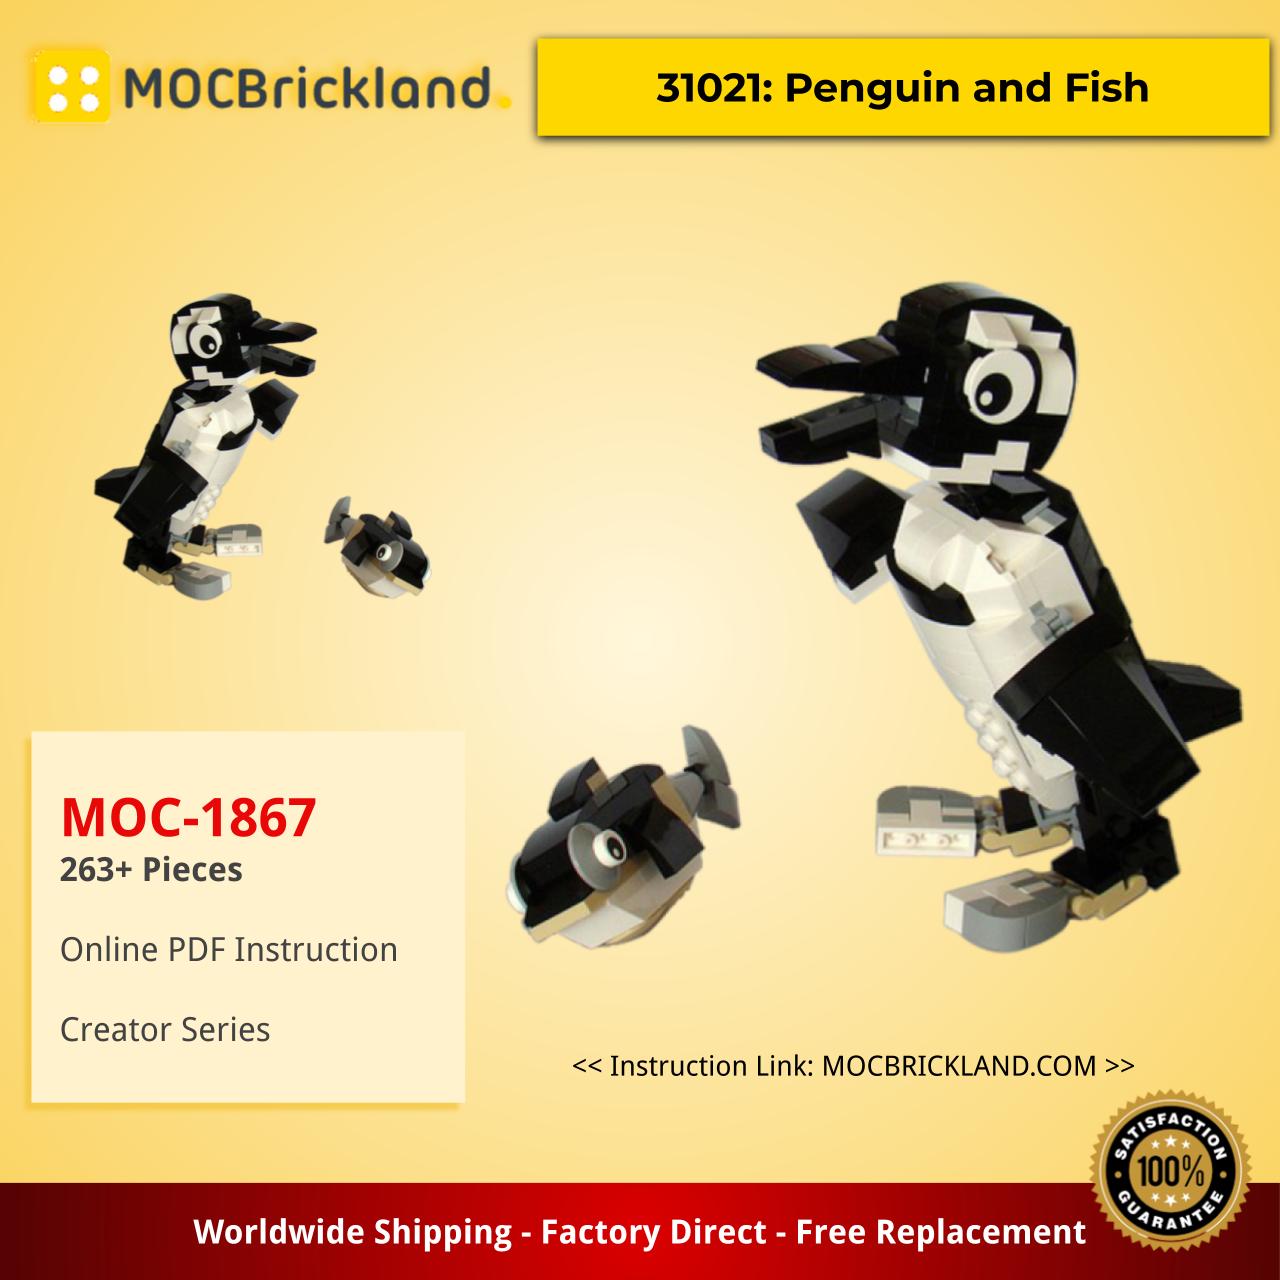 Creator MOC-1867 31021: Penguin and Fish by Tomik MOCBRICKLAND